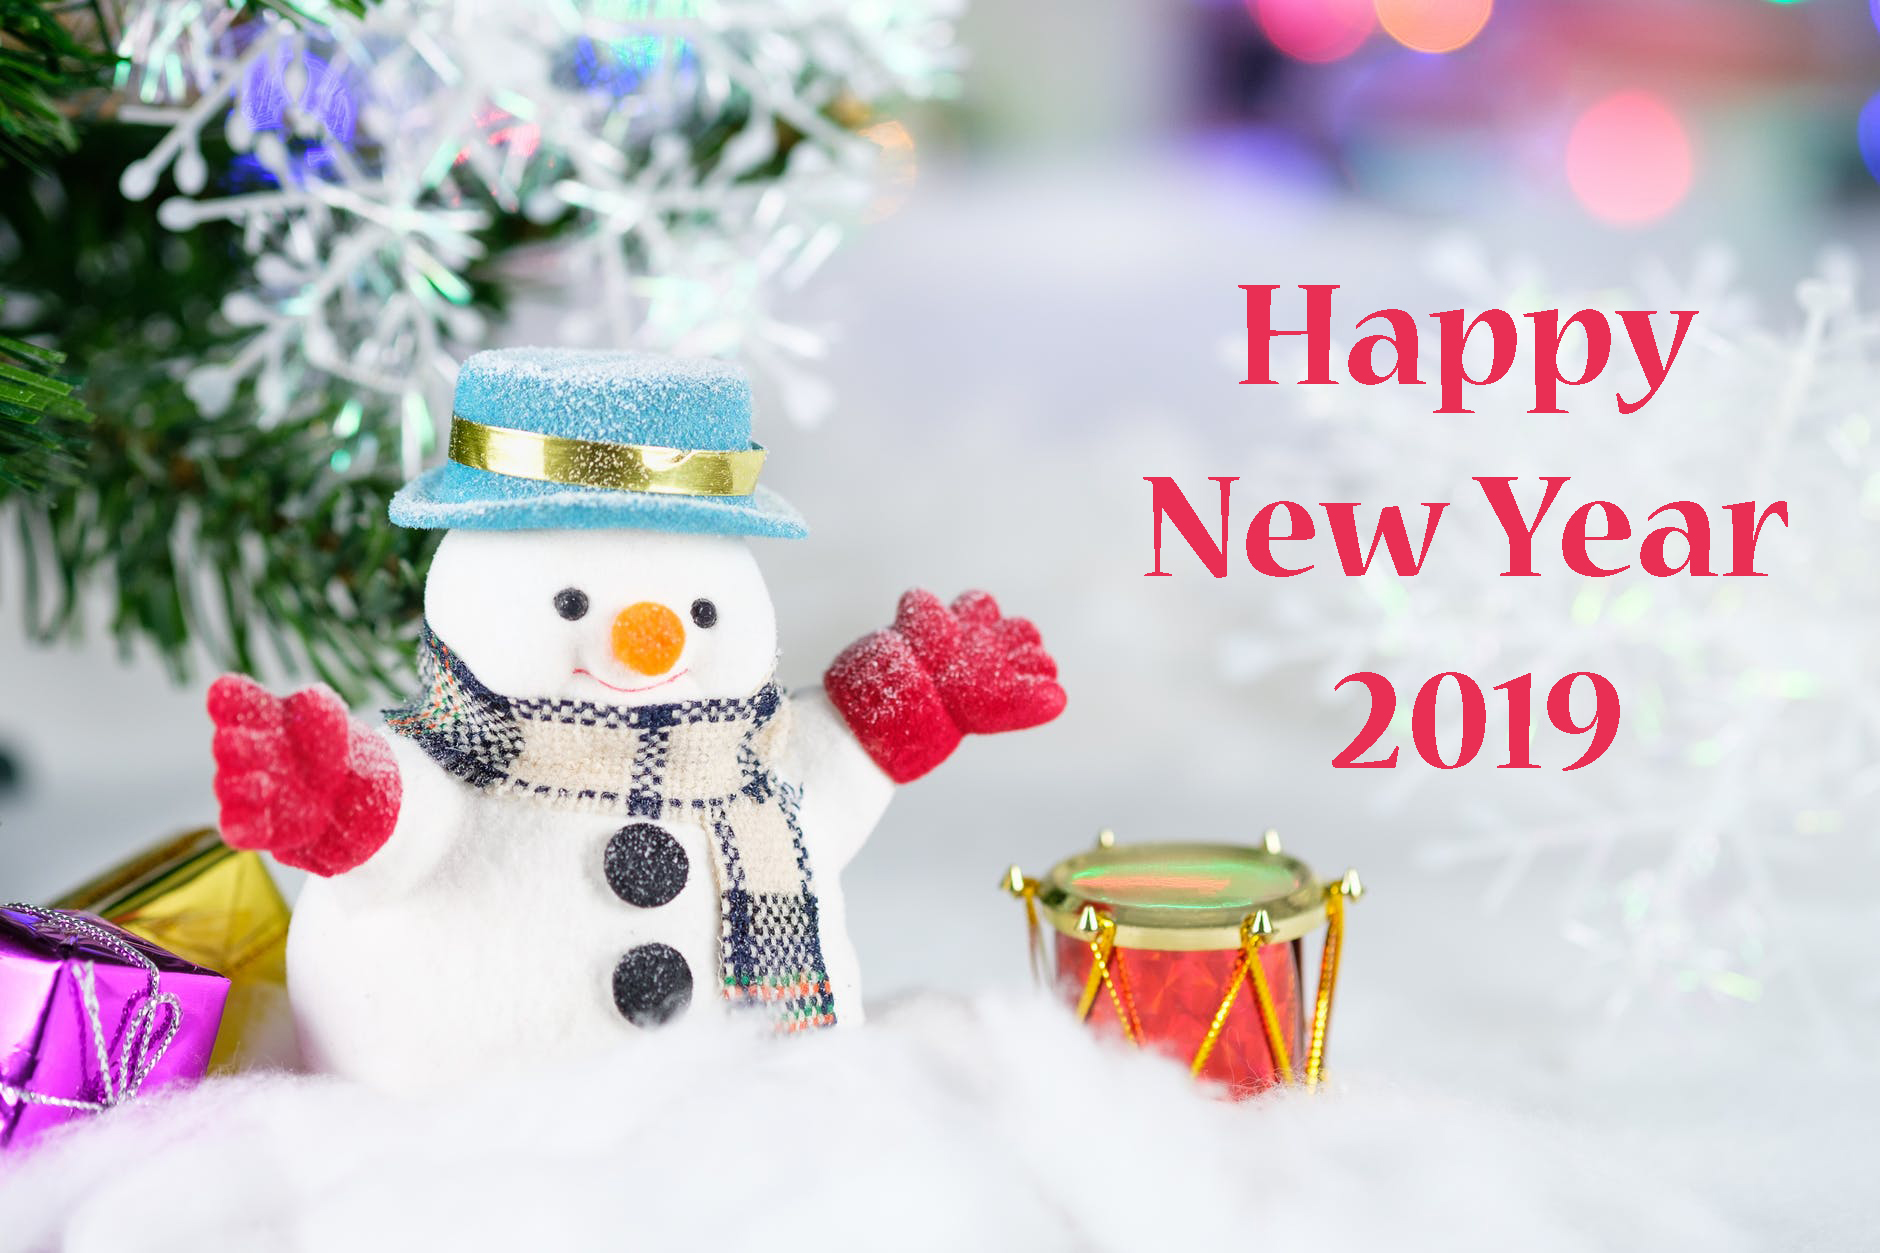 Happy New Year 2019 Greeting Card - Childrens Christmas Party - HD Wallpaper 